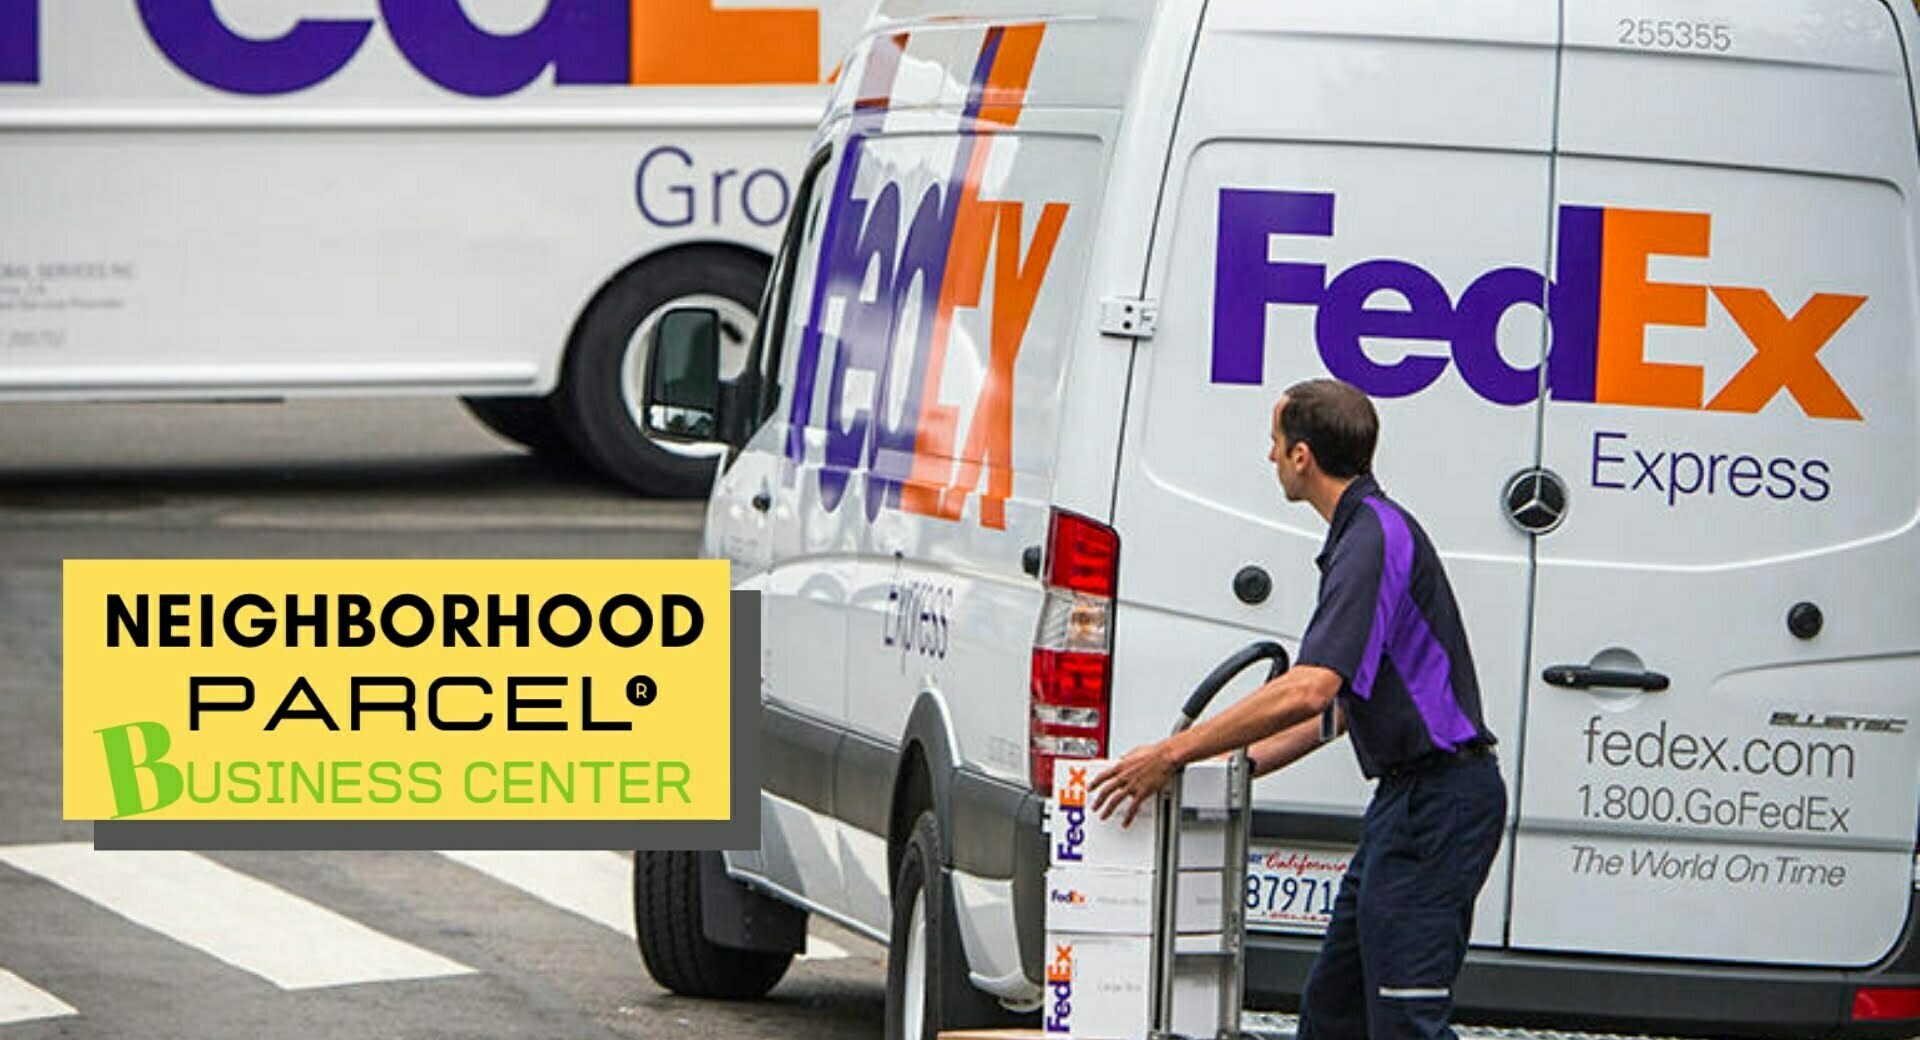 Neighborhood Parcel’s FedEx shipping services